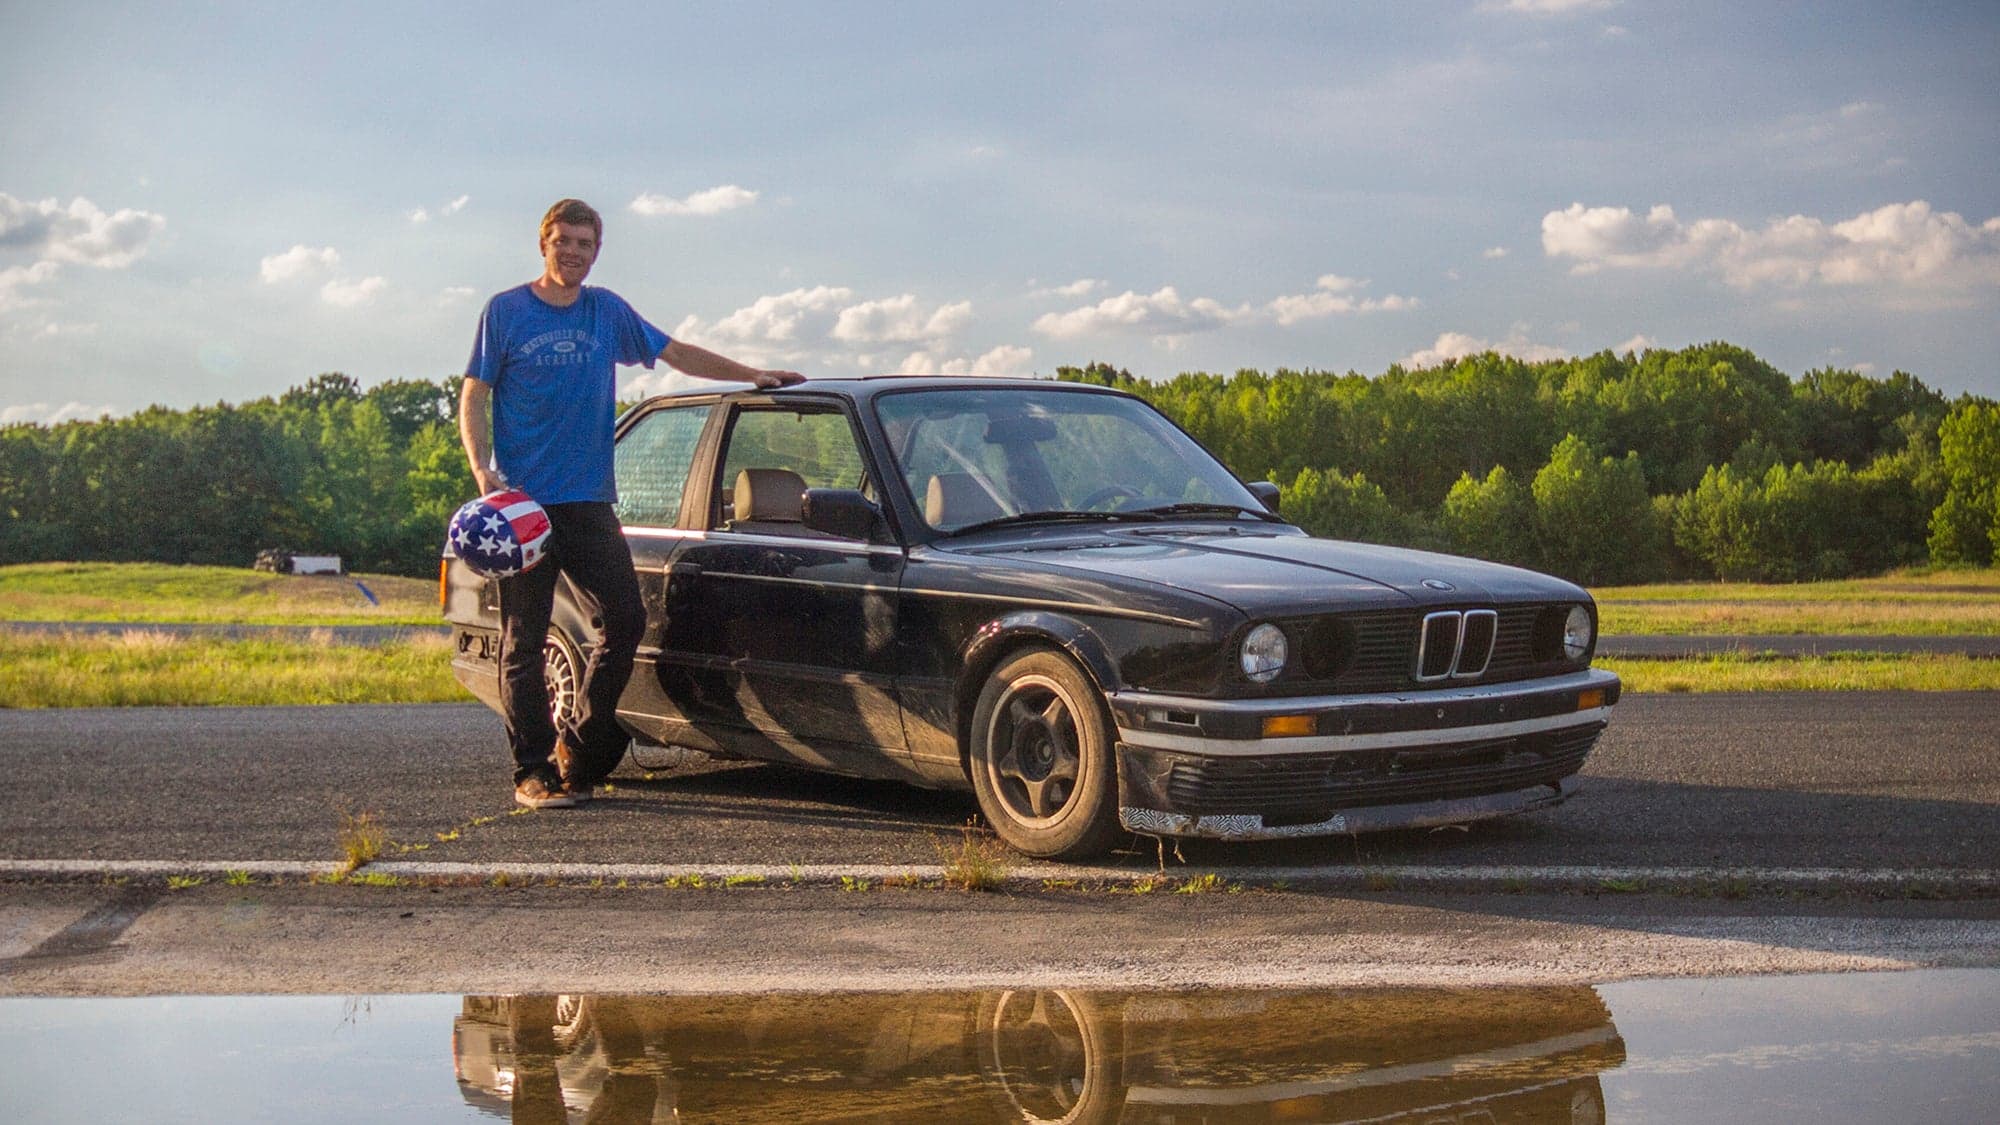 How We Took a $2,000 BMW and Made It Go Off-Roading, Run an Endurance Race, and More